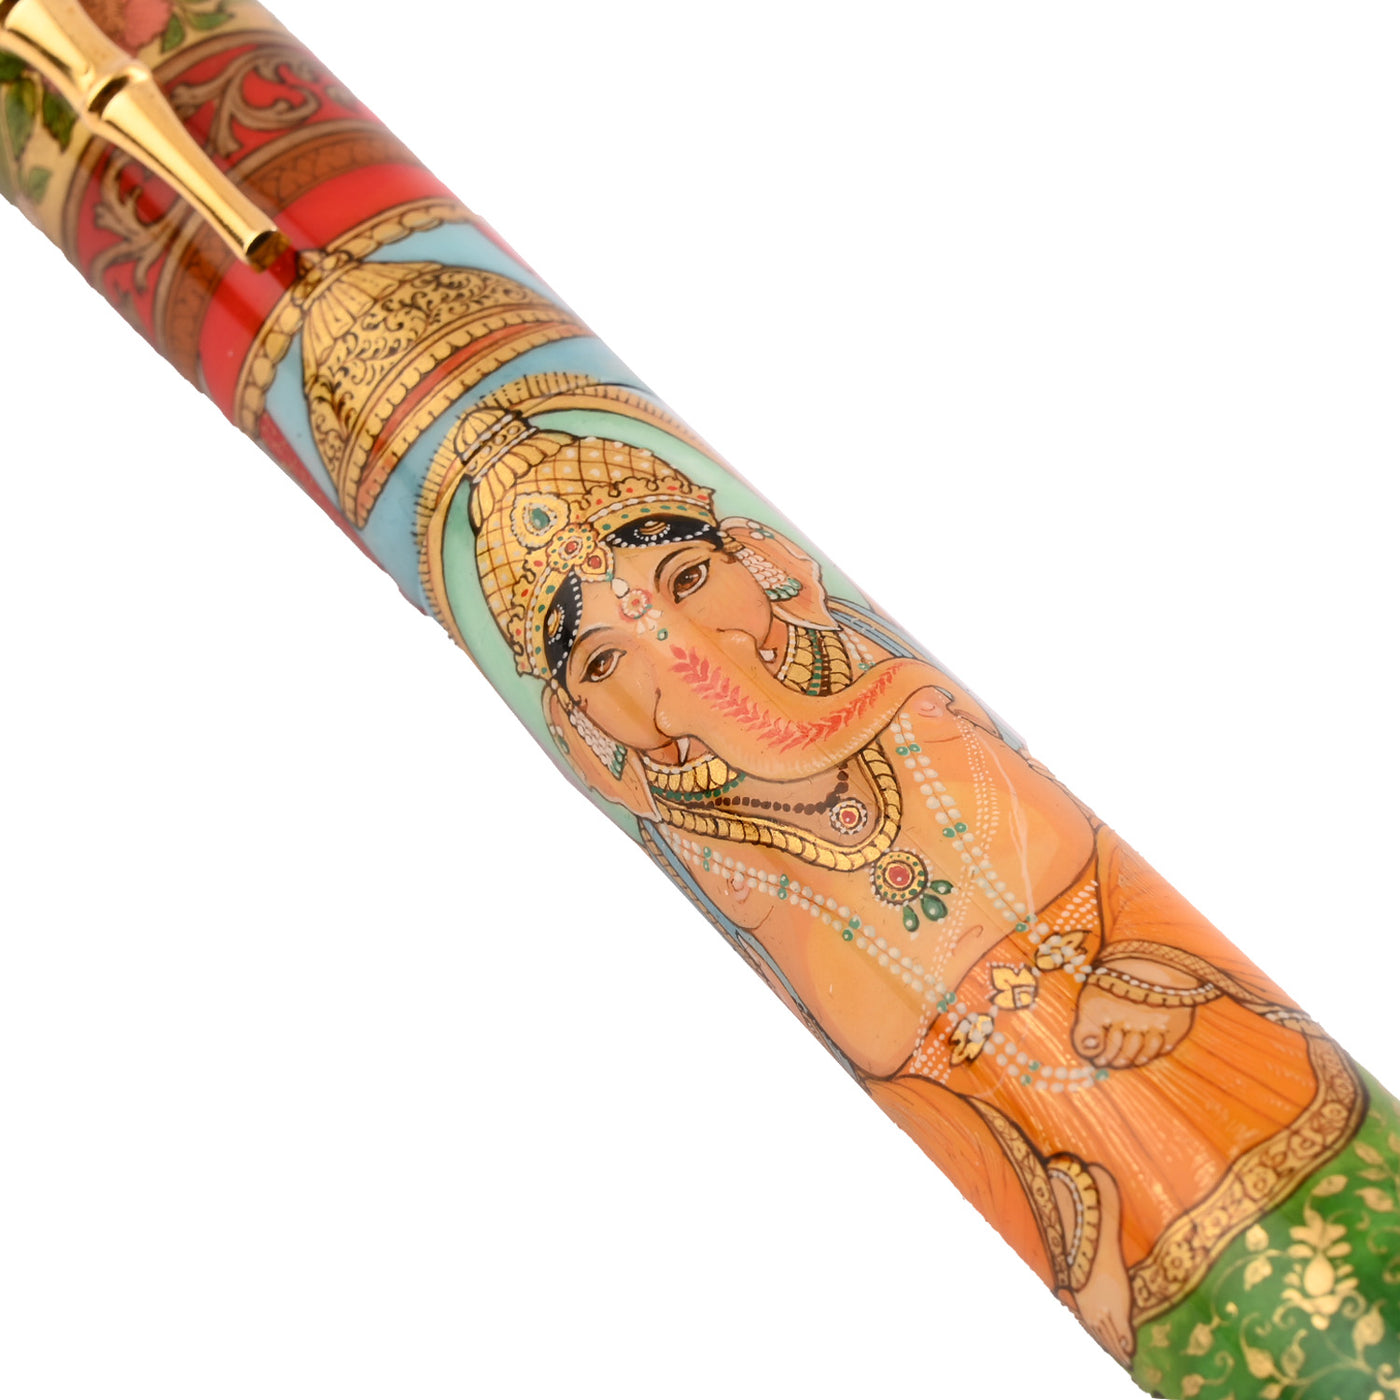 AP Limited Editions Russian Lacquer Art Fountain Pen - Ganesha (Limited Edition) 6